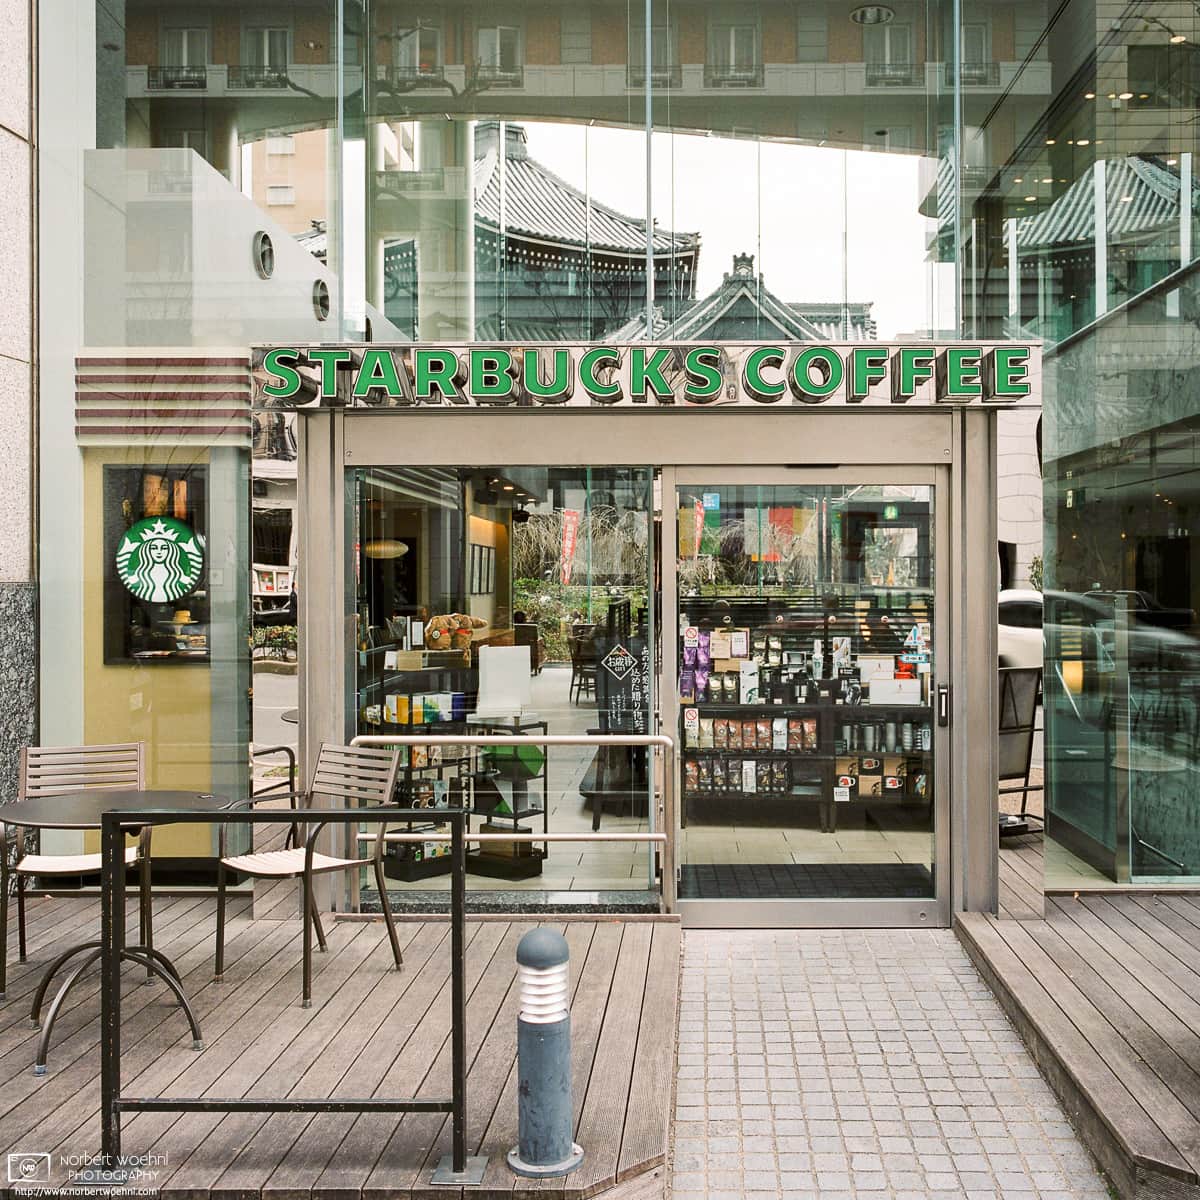 Standing outside this Starbucks in Kyoto, Japan, I noticed Rokkakudo Temple making a discrete appearance in the background.